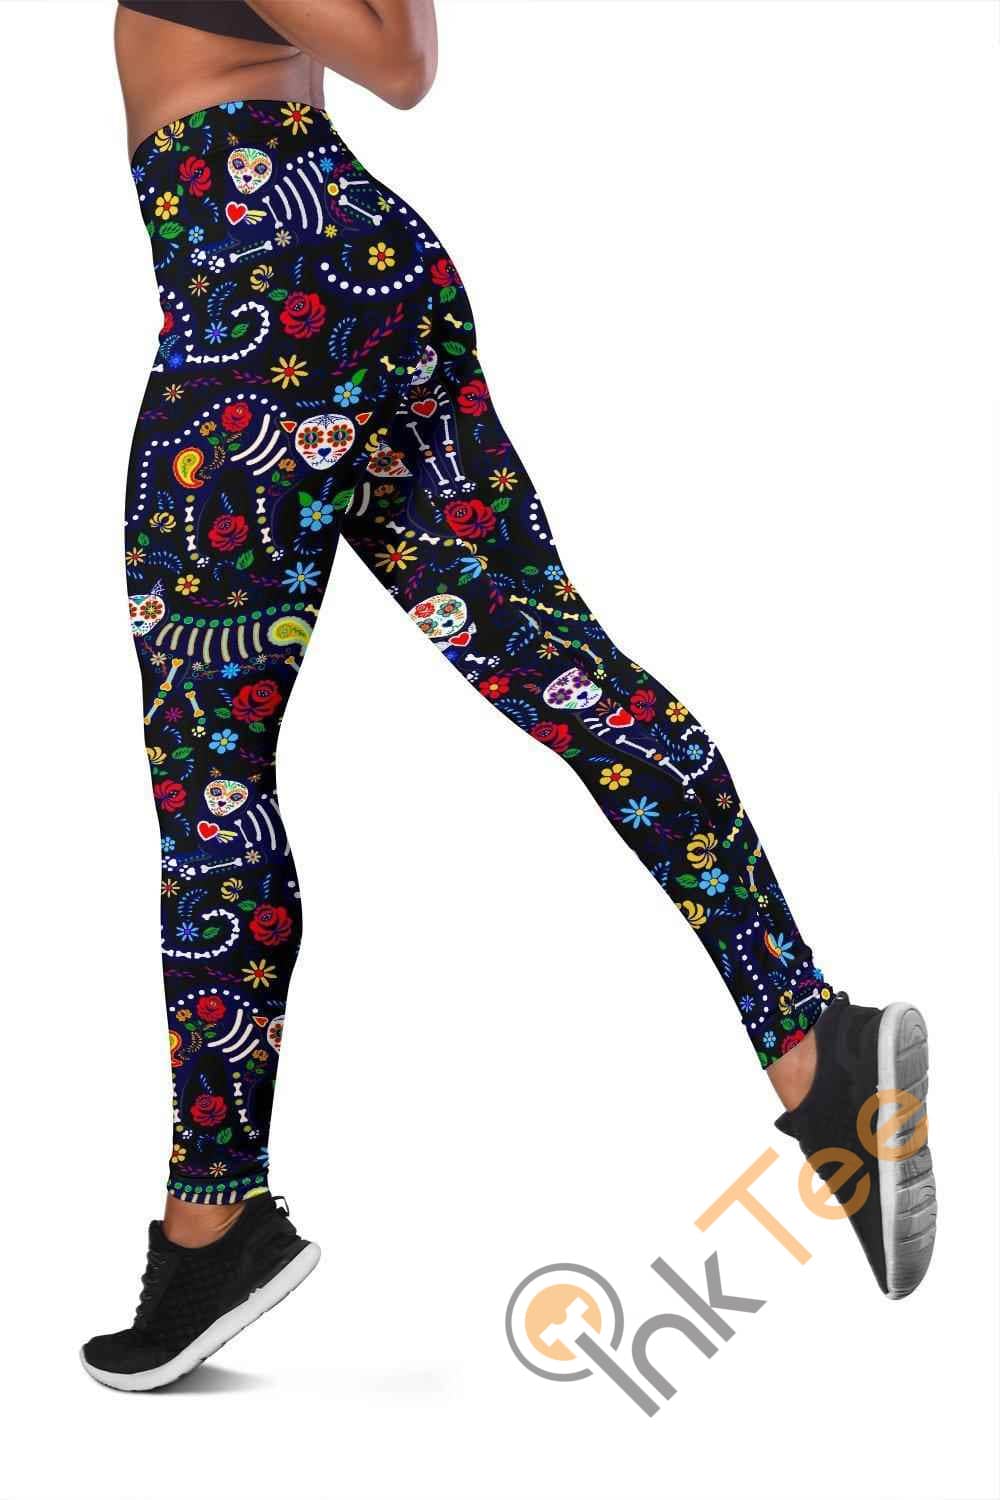 Inktee Store - Day Of The Dead 3D All Over Print For Yoga Fitness Women'S Leggings Image